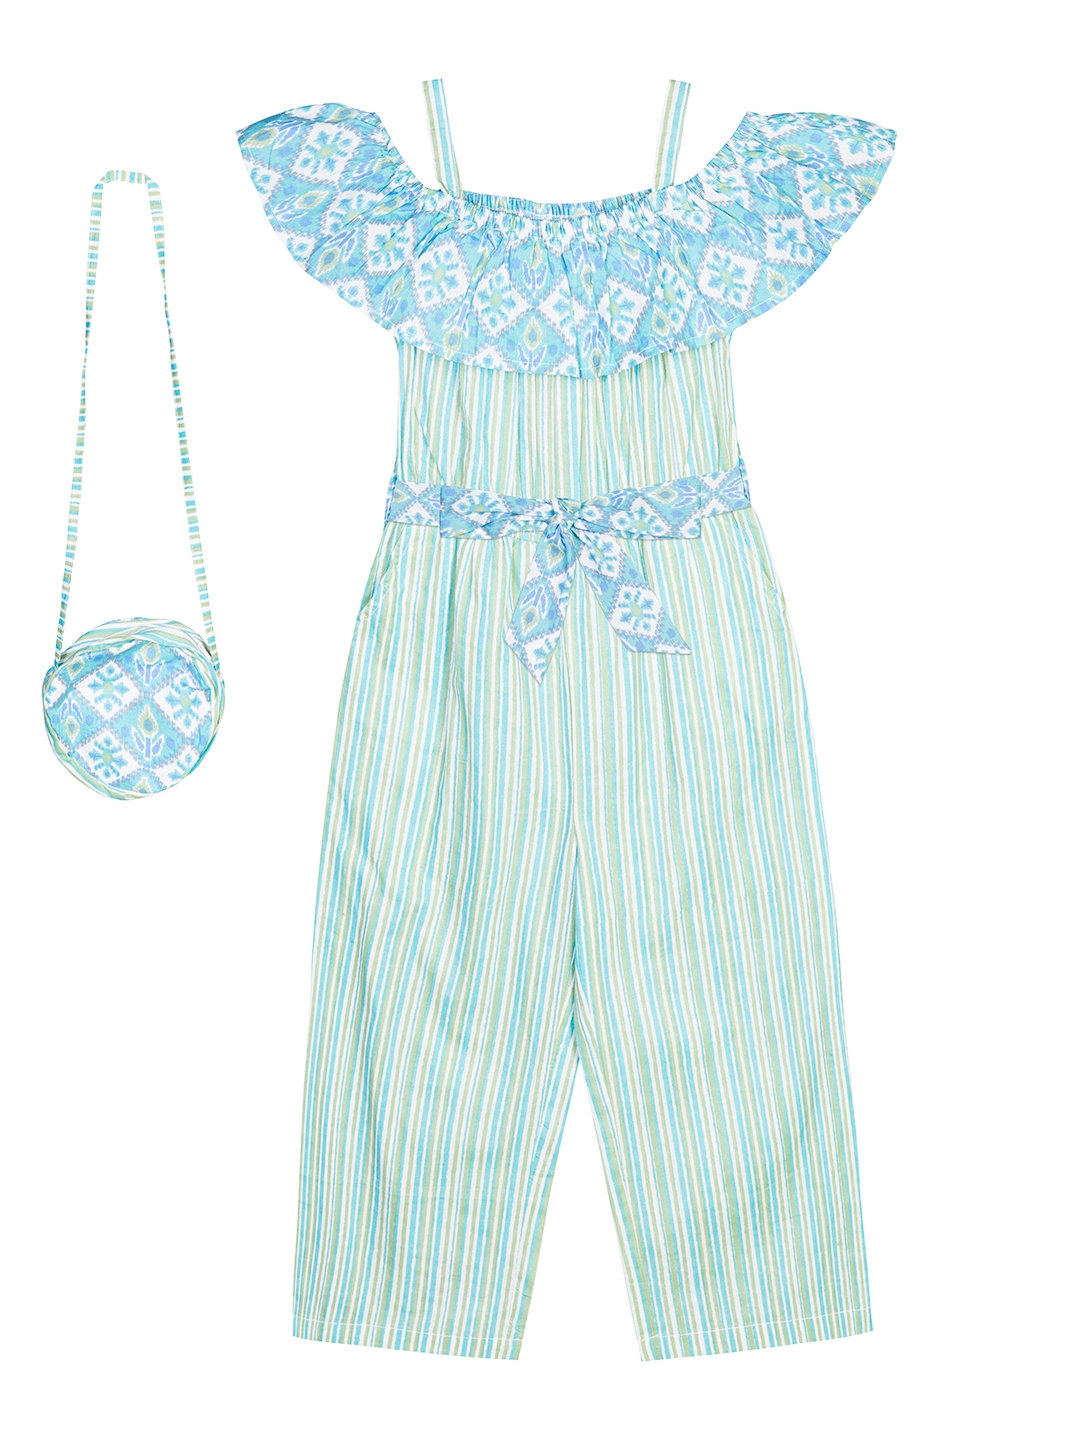 Budding Bees | Budding Bees Girls Blue Striped Dress With Matching Hand Bag 1